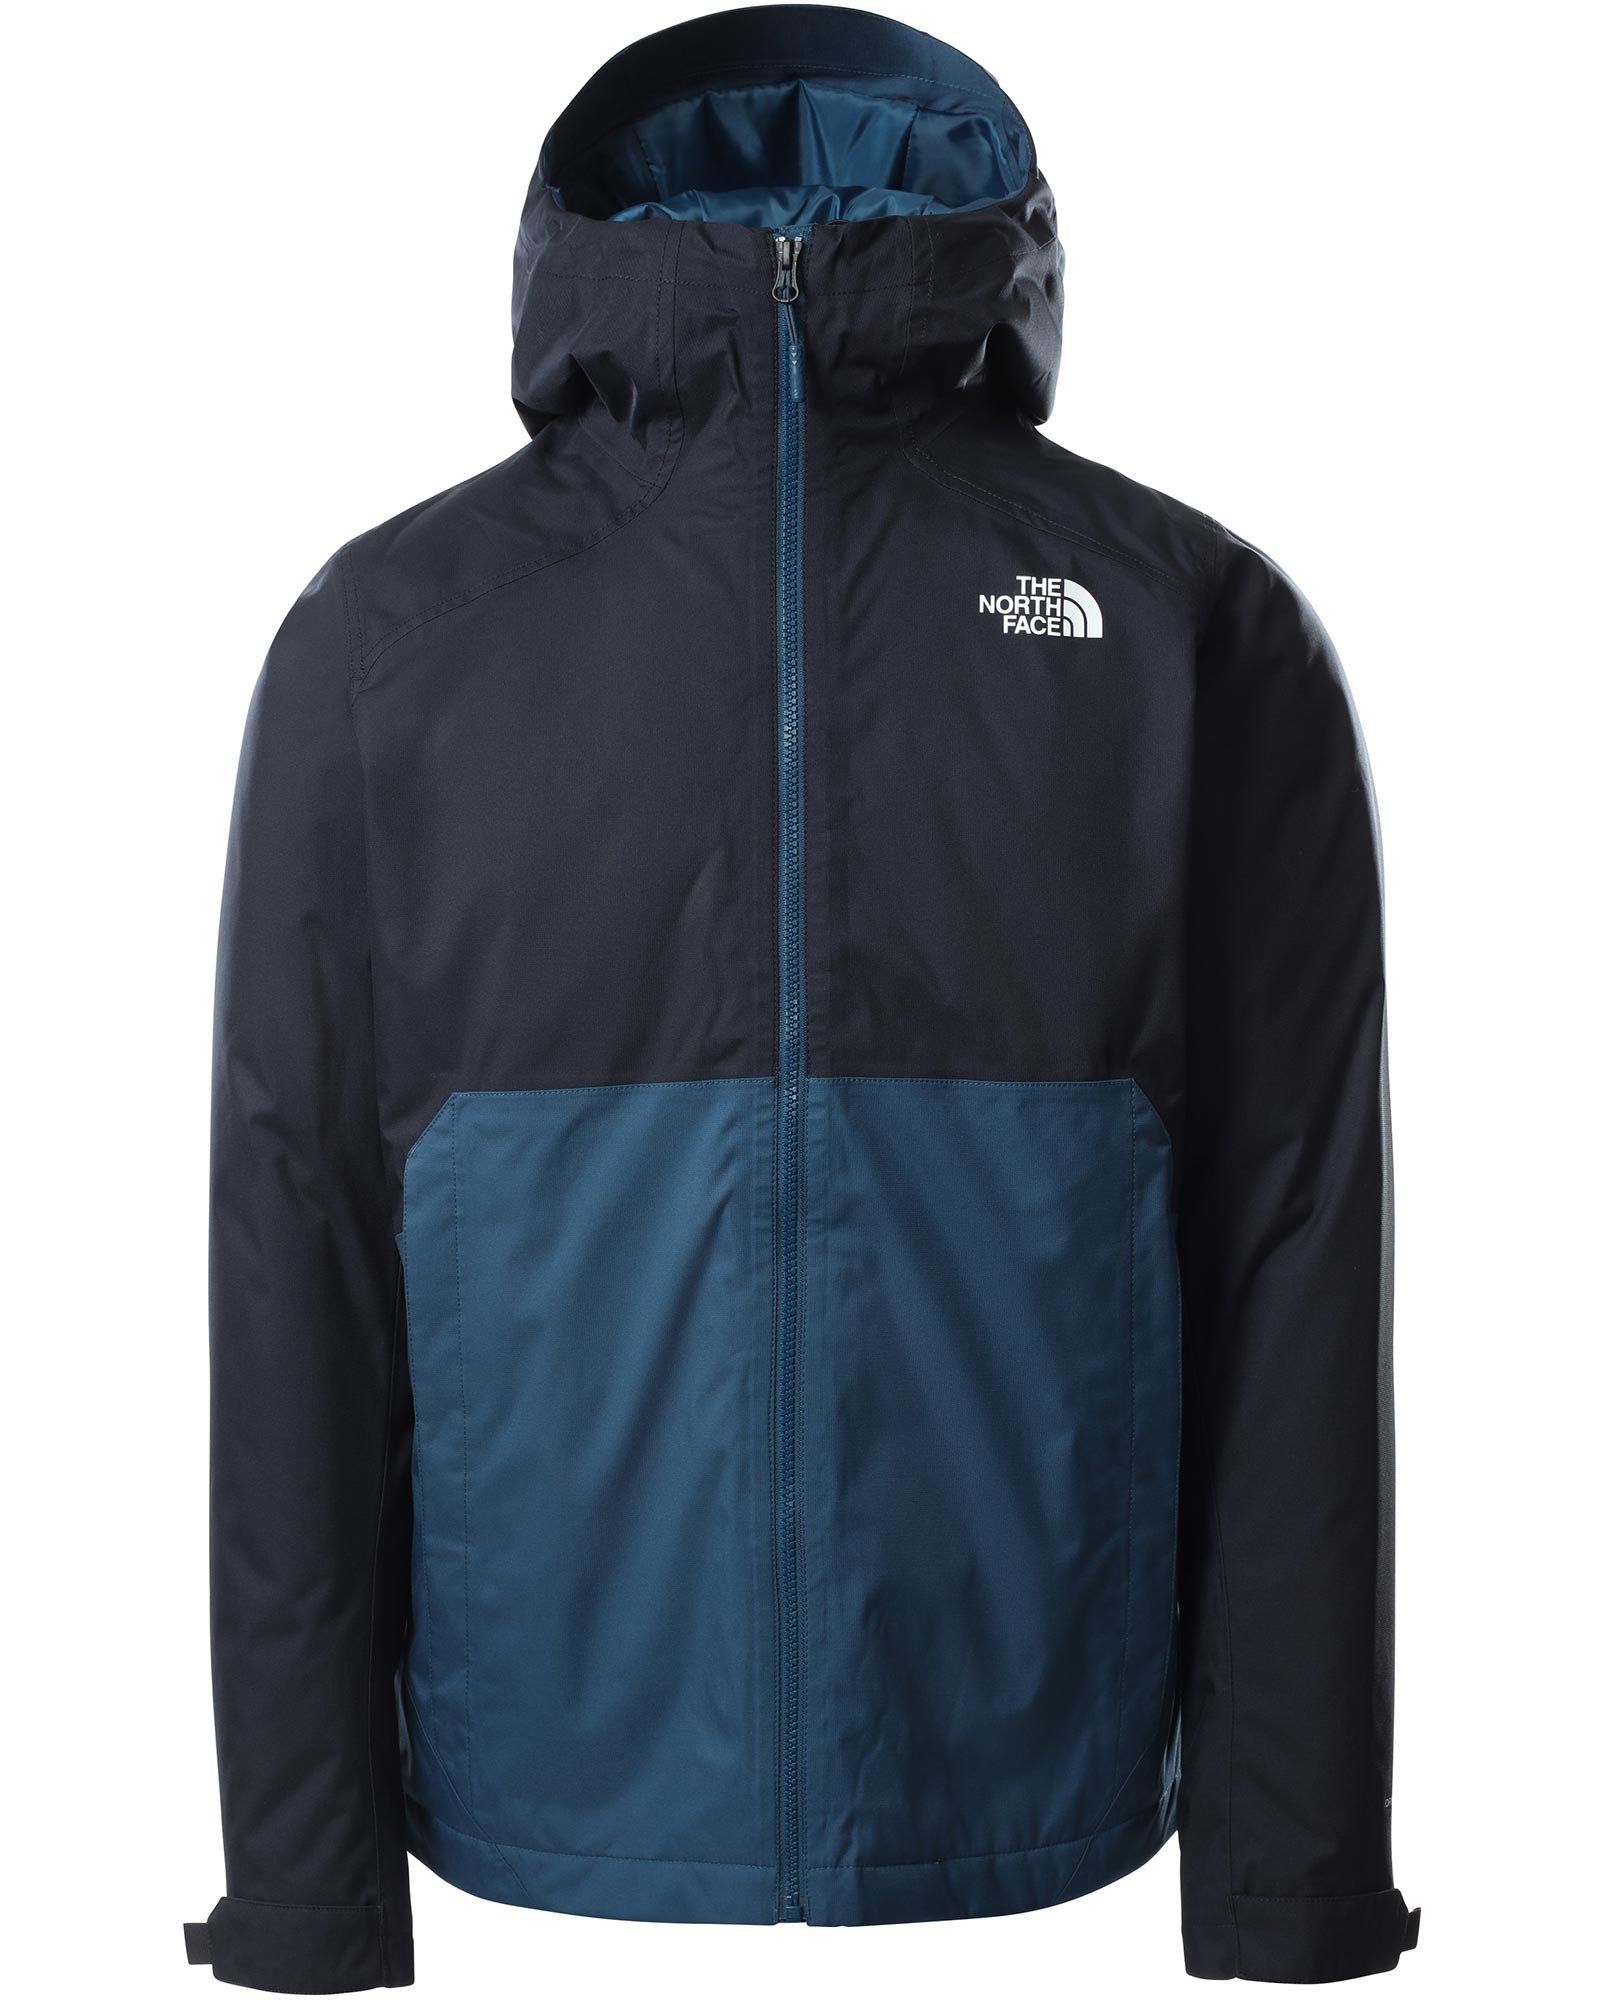 The North Face Millerton DryVent Men’s Insulated Jacket - Monterey Blue/TNF Black XL